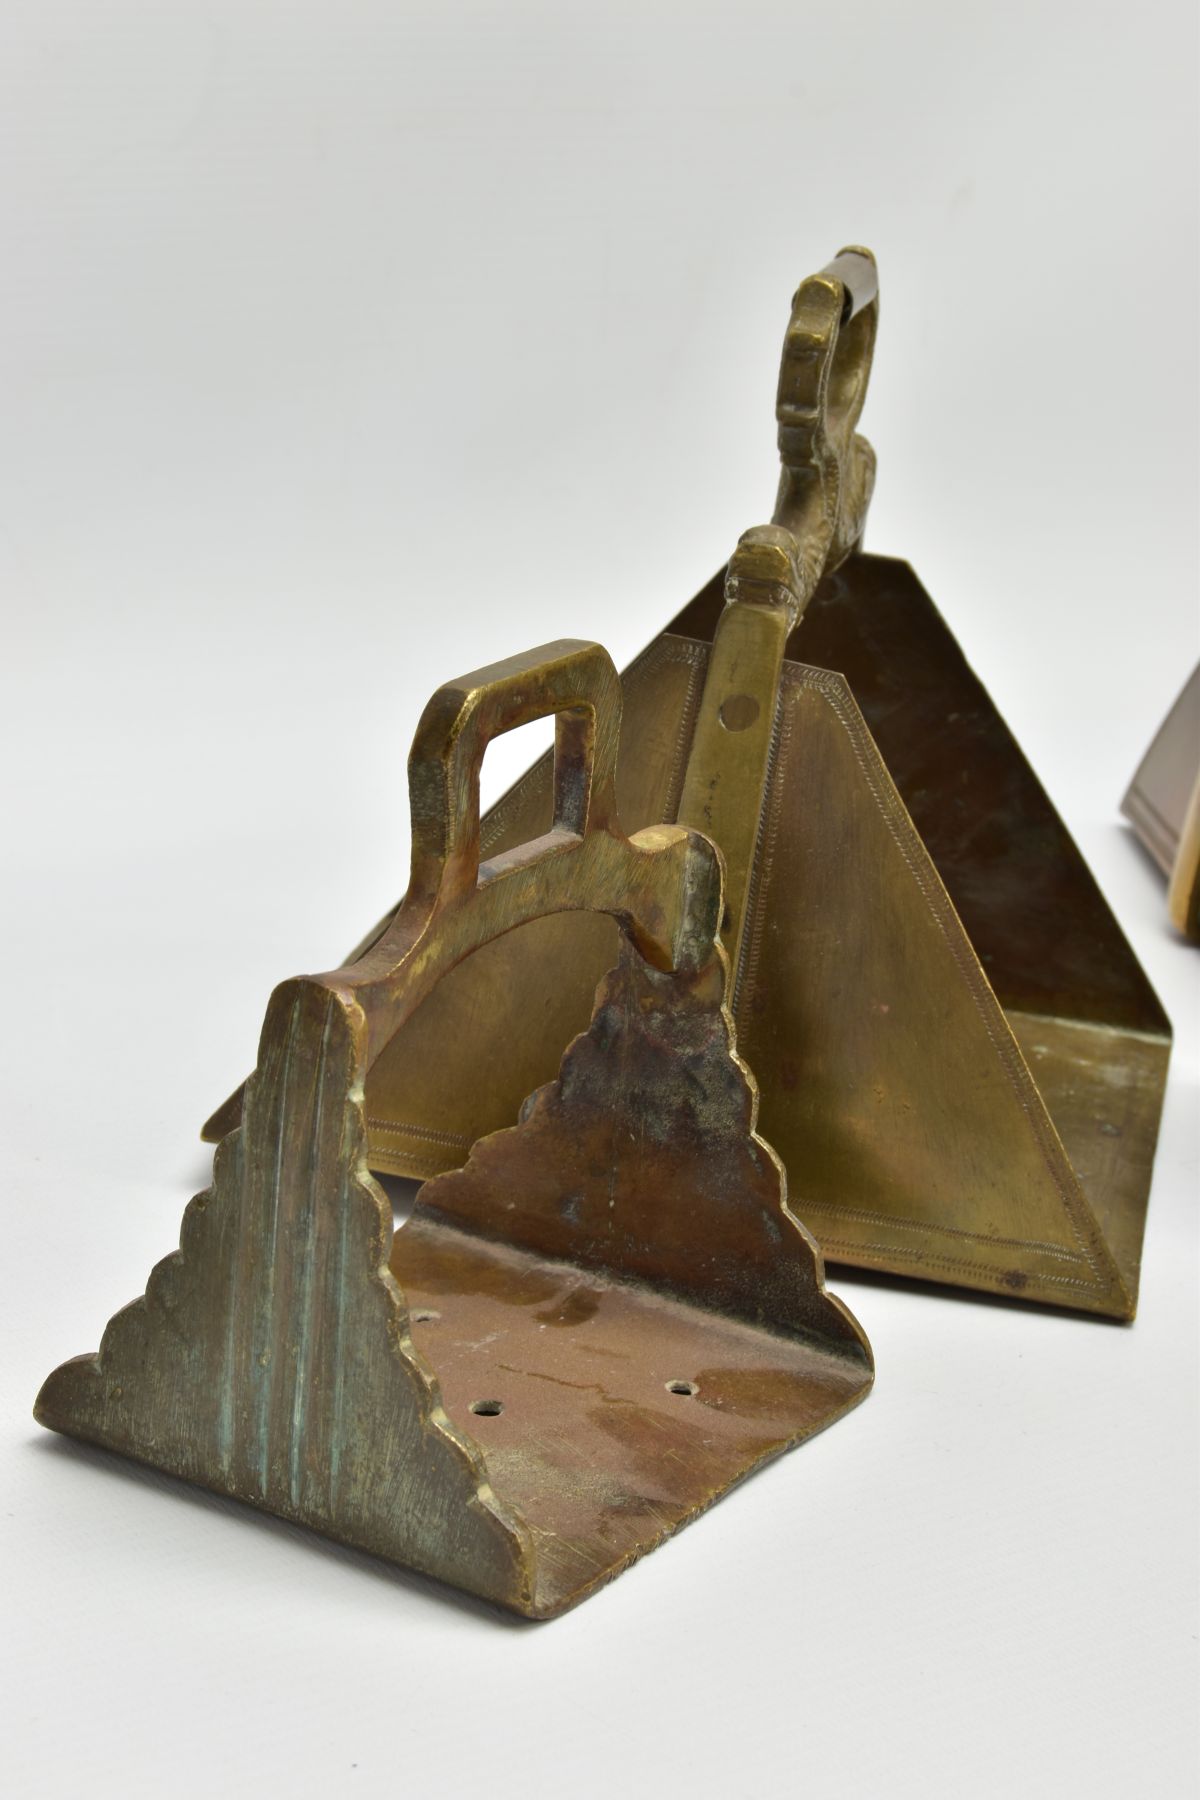 TWO PAIRS OF TURKISH OR OTTOMAN HORSE STIRRUPS POSSIBLE LATE 19 CENTURY, one pair larger which has - Image 3 of 5